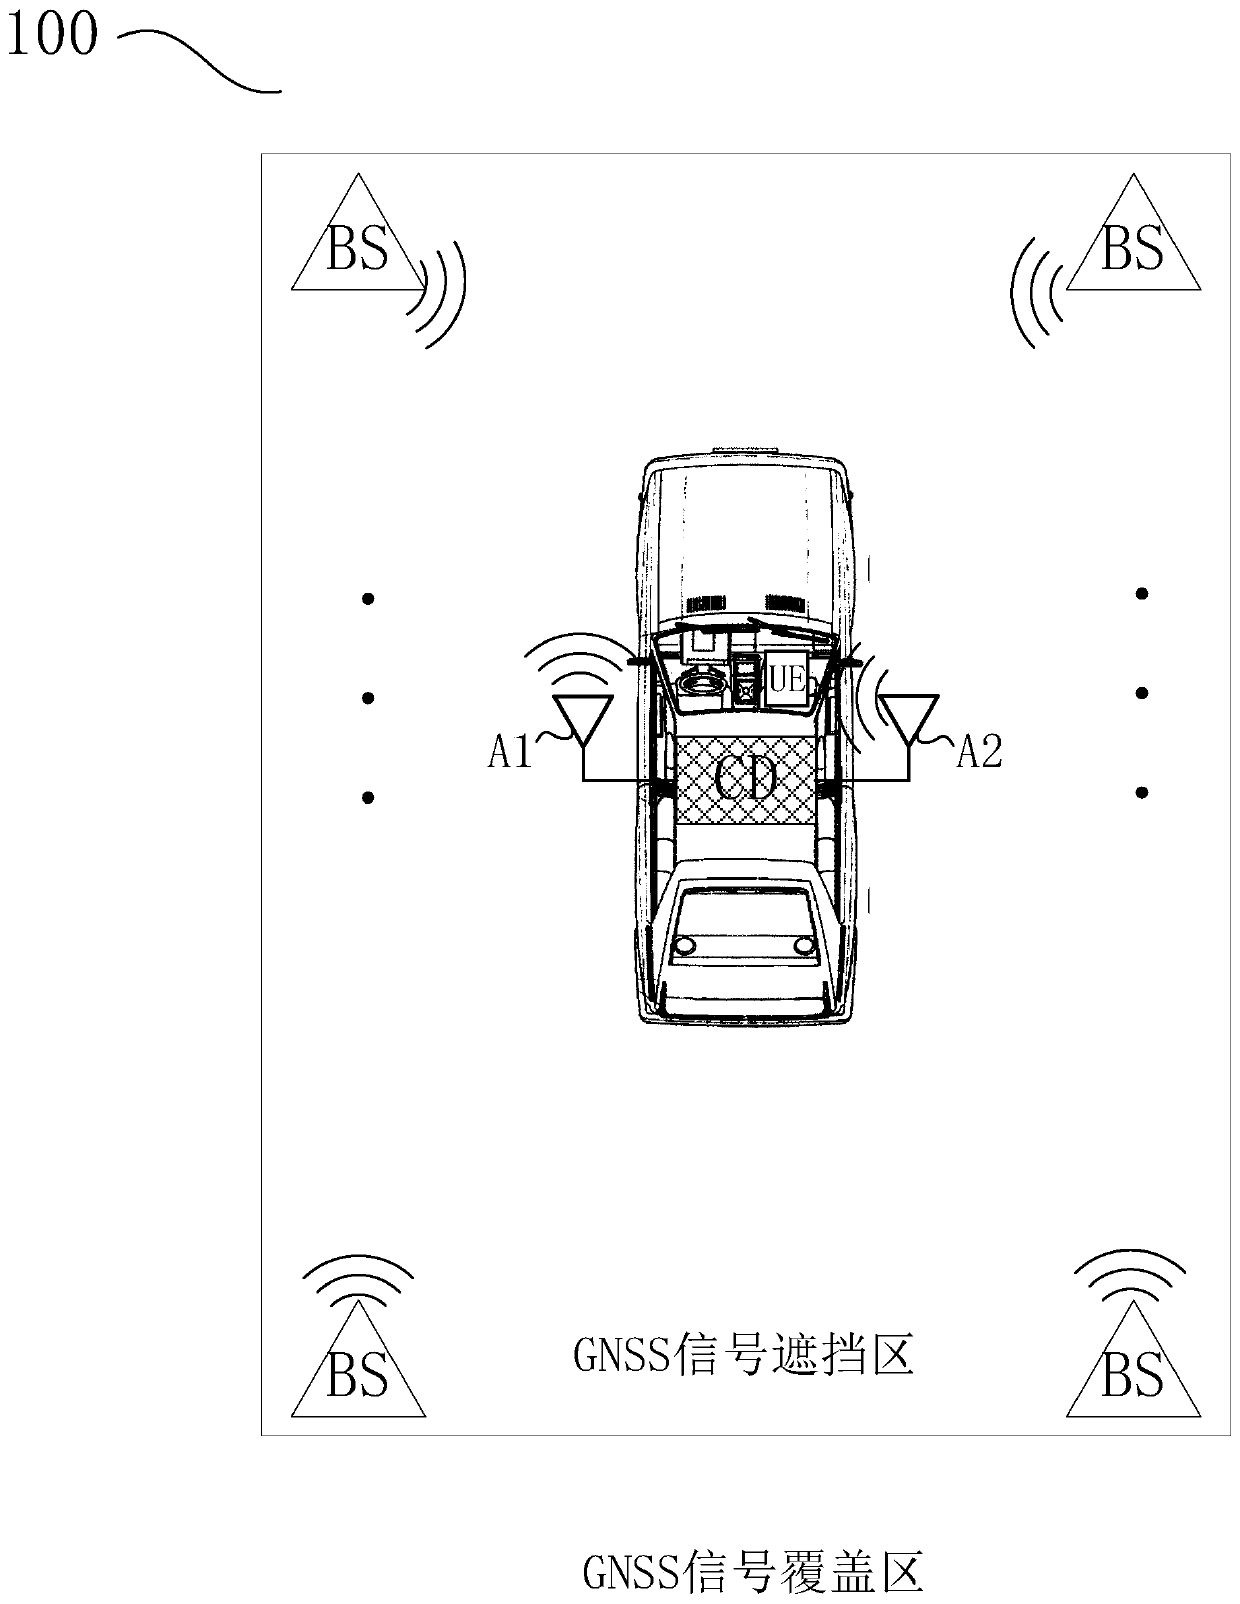 Exclusive vehicle-mounted GNSS (Global Navigation Satellite System) signal compensation device and positioning system and method